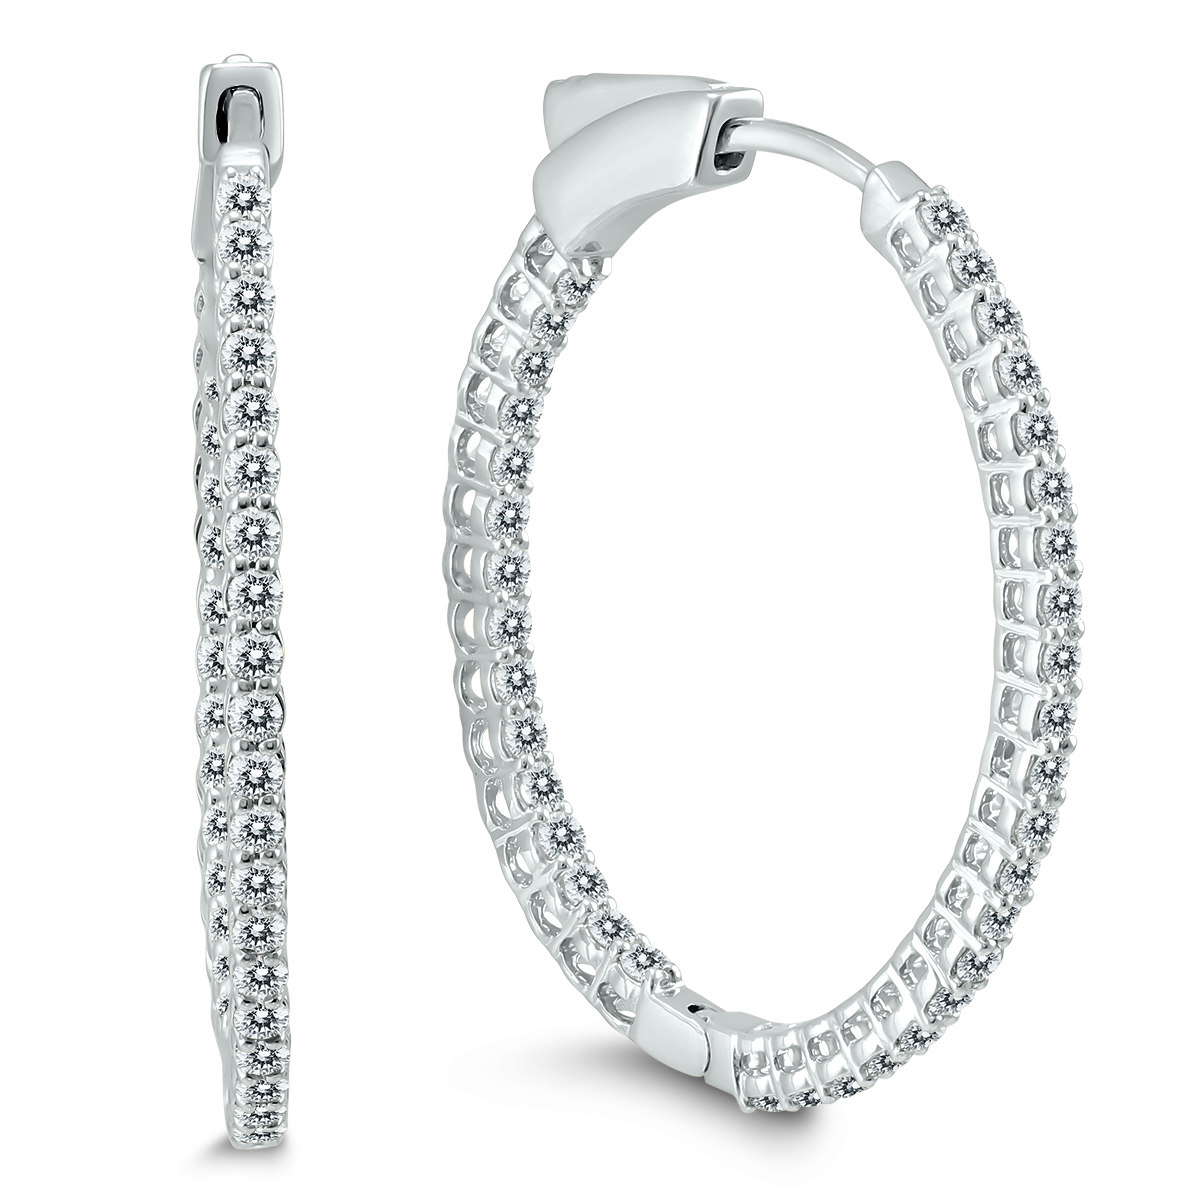 1 Carat TW Round Diamond Hoop Earrings with Push Down Button Lock in 10K White Gold